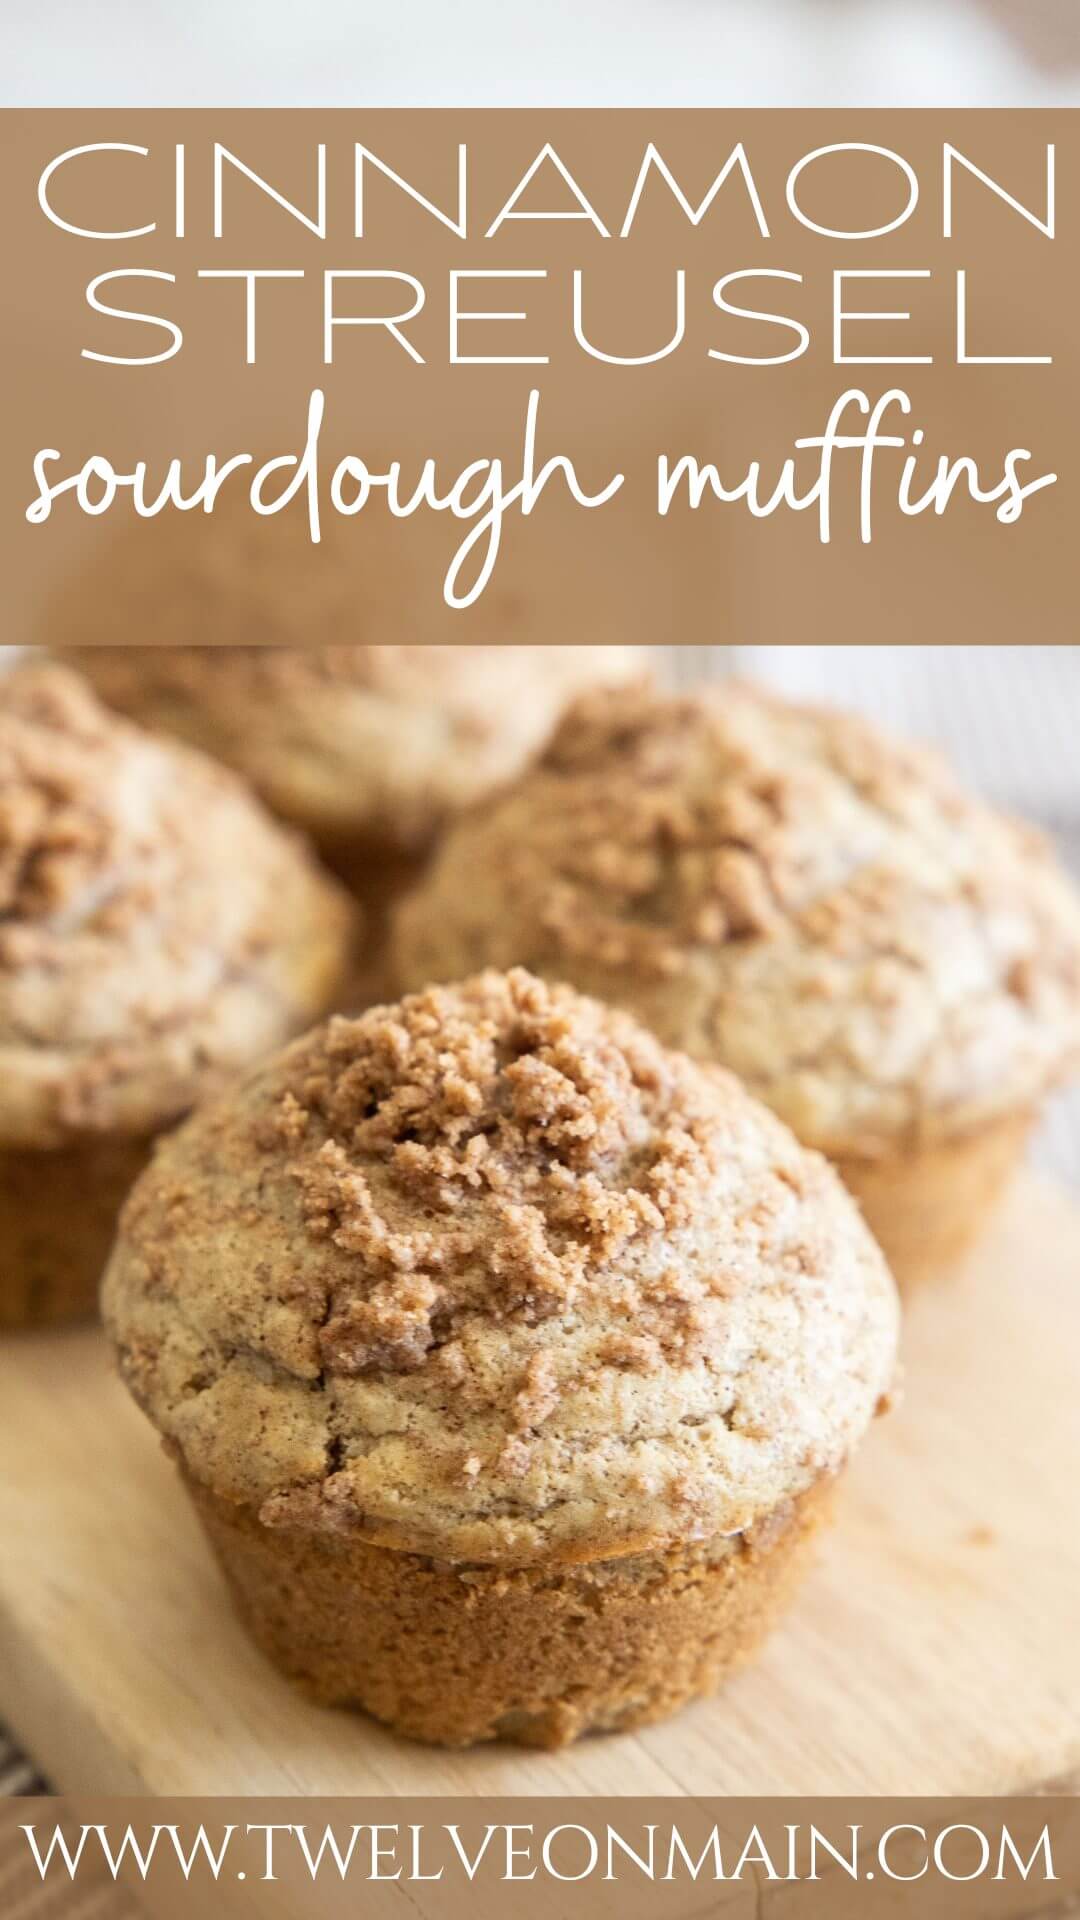 How to make easy sourdough discard cinnamon streusel muffins using your sourdough discard. These are so easy to make and taste amazing! With the combination of tangy sourdough discard and sweet and spicy cinnamon streusel this is the perfect breakfast treat and a great snack! It is also a great way to use up that sourdough discard.